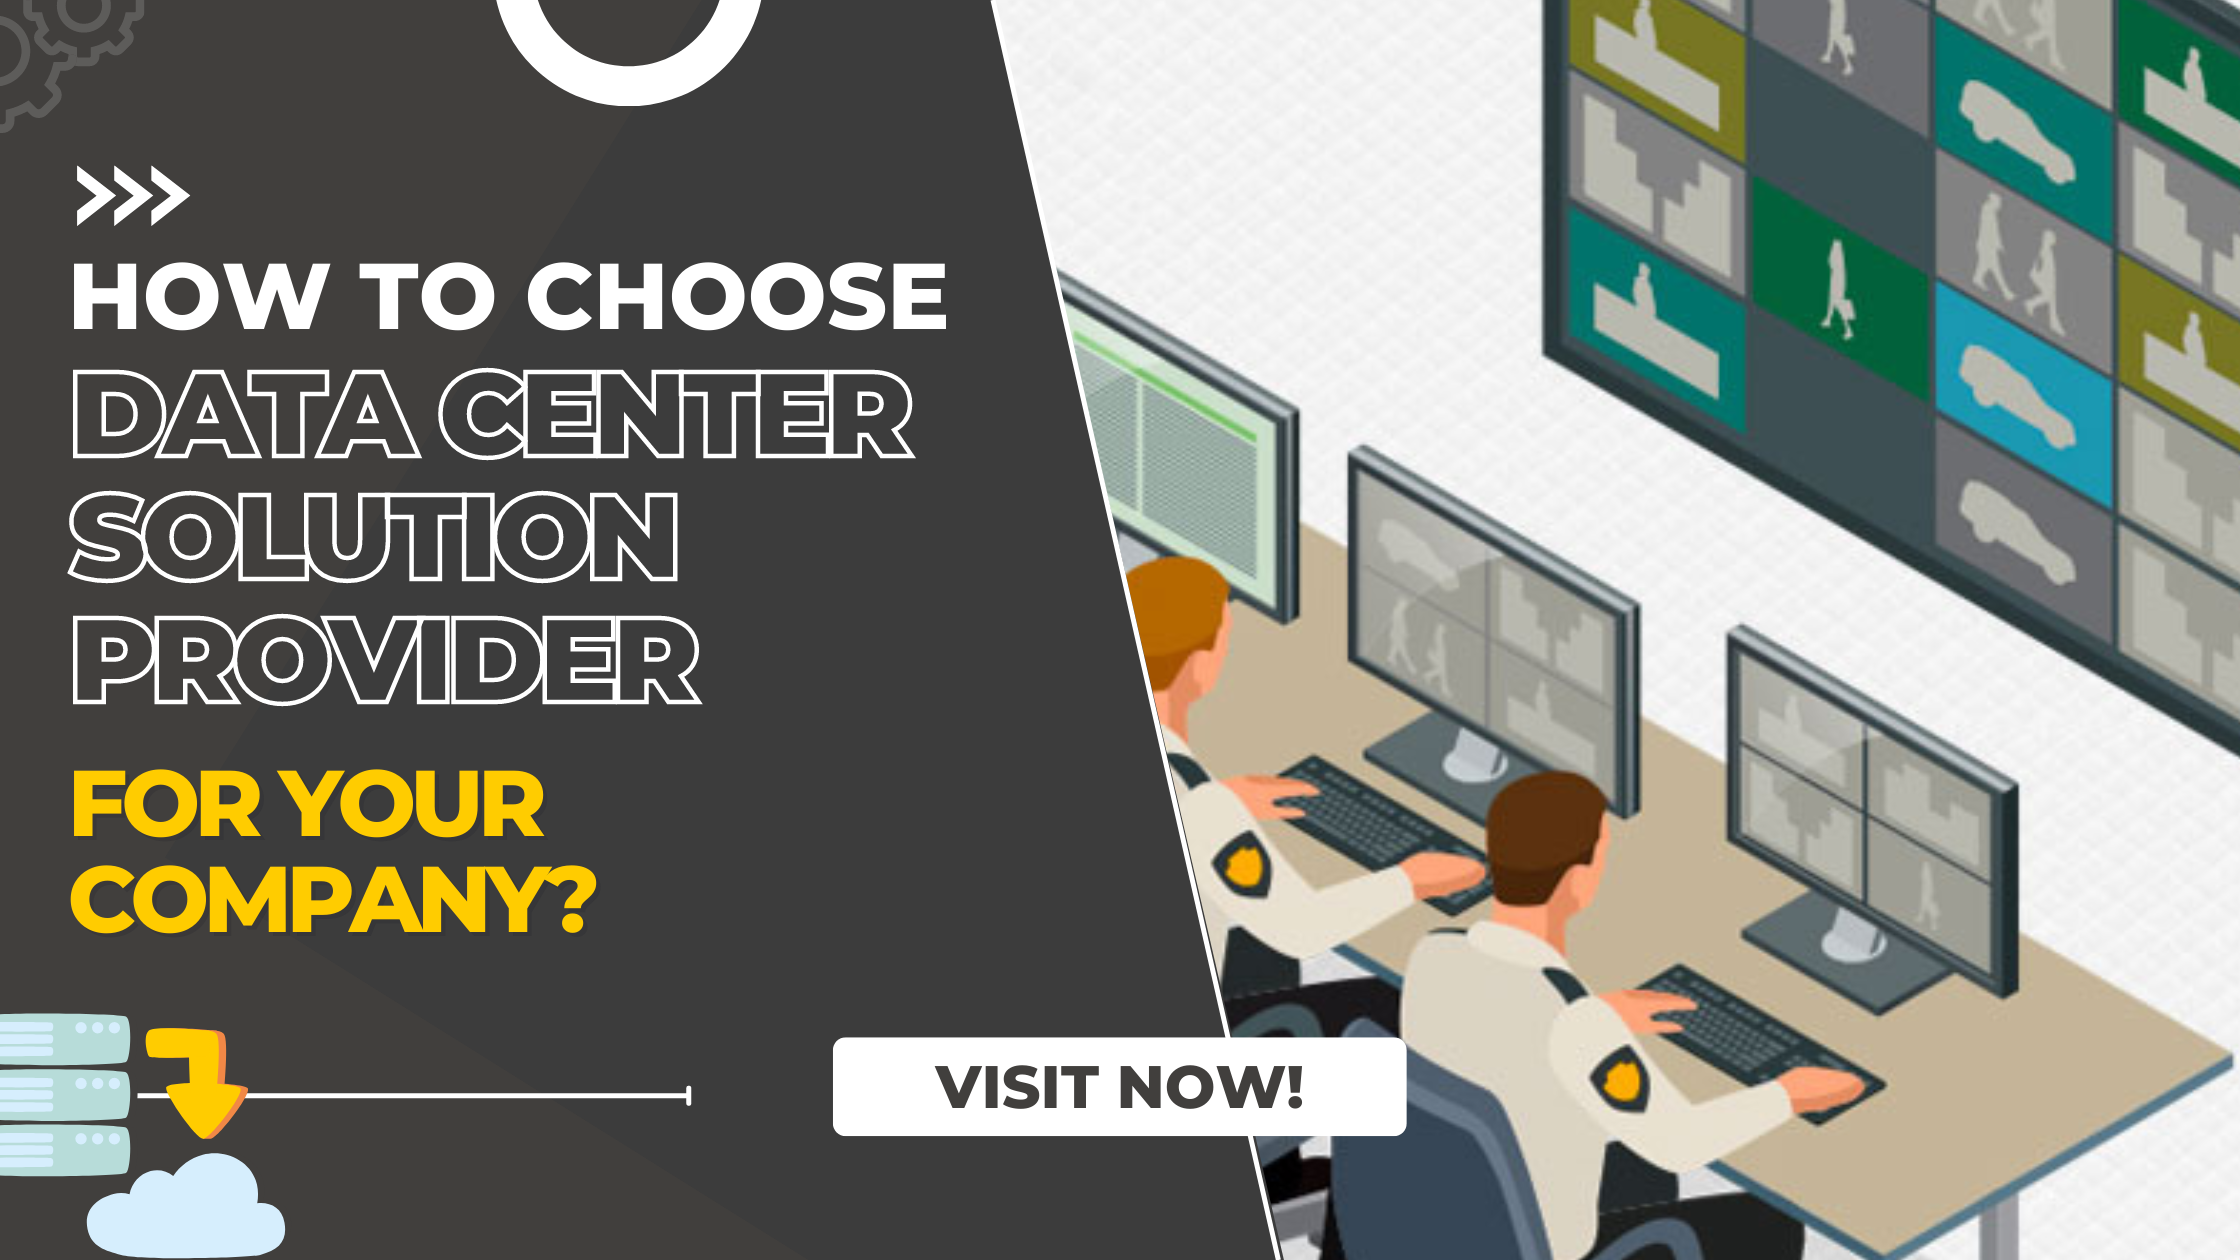 How to choose Data Center Solution provider for your company?